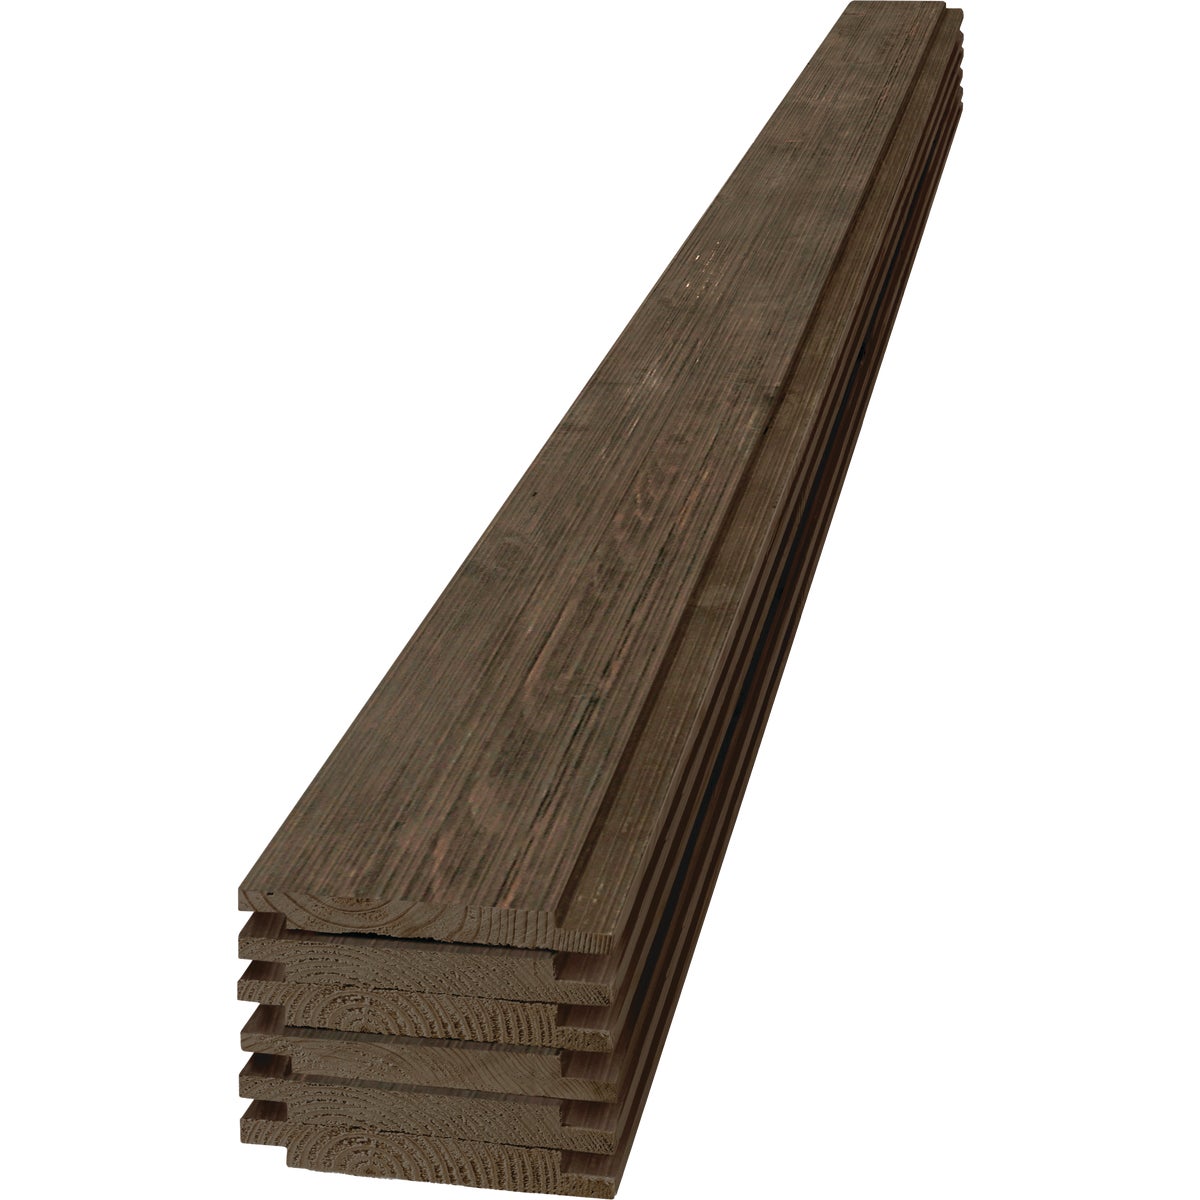 UFP-Edge 6 In. W x 6 Ft. L x 1 In. Thick Brown Wood Rustic Shiplap Board (13.86 Sq. Ft./6-Pack)